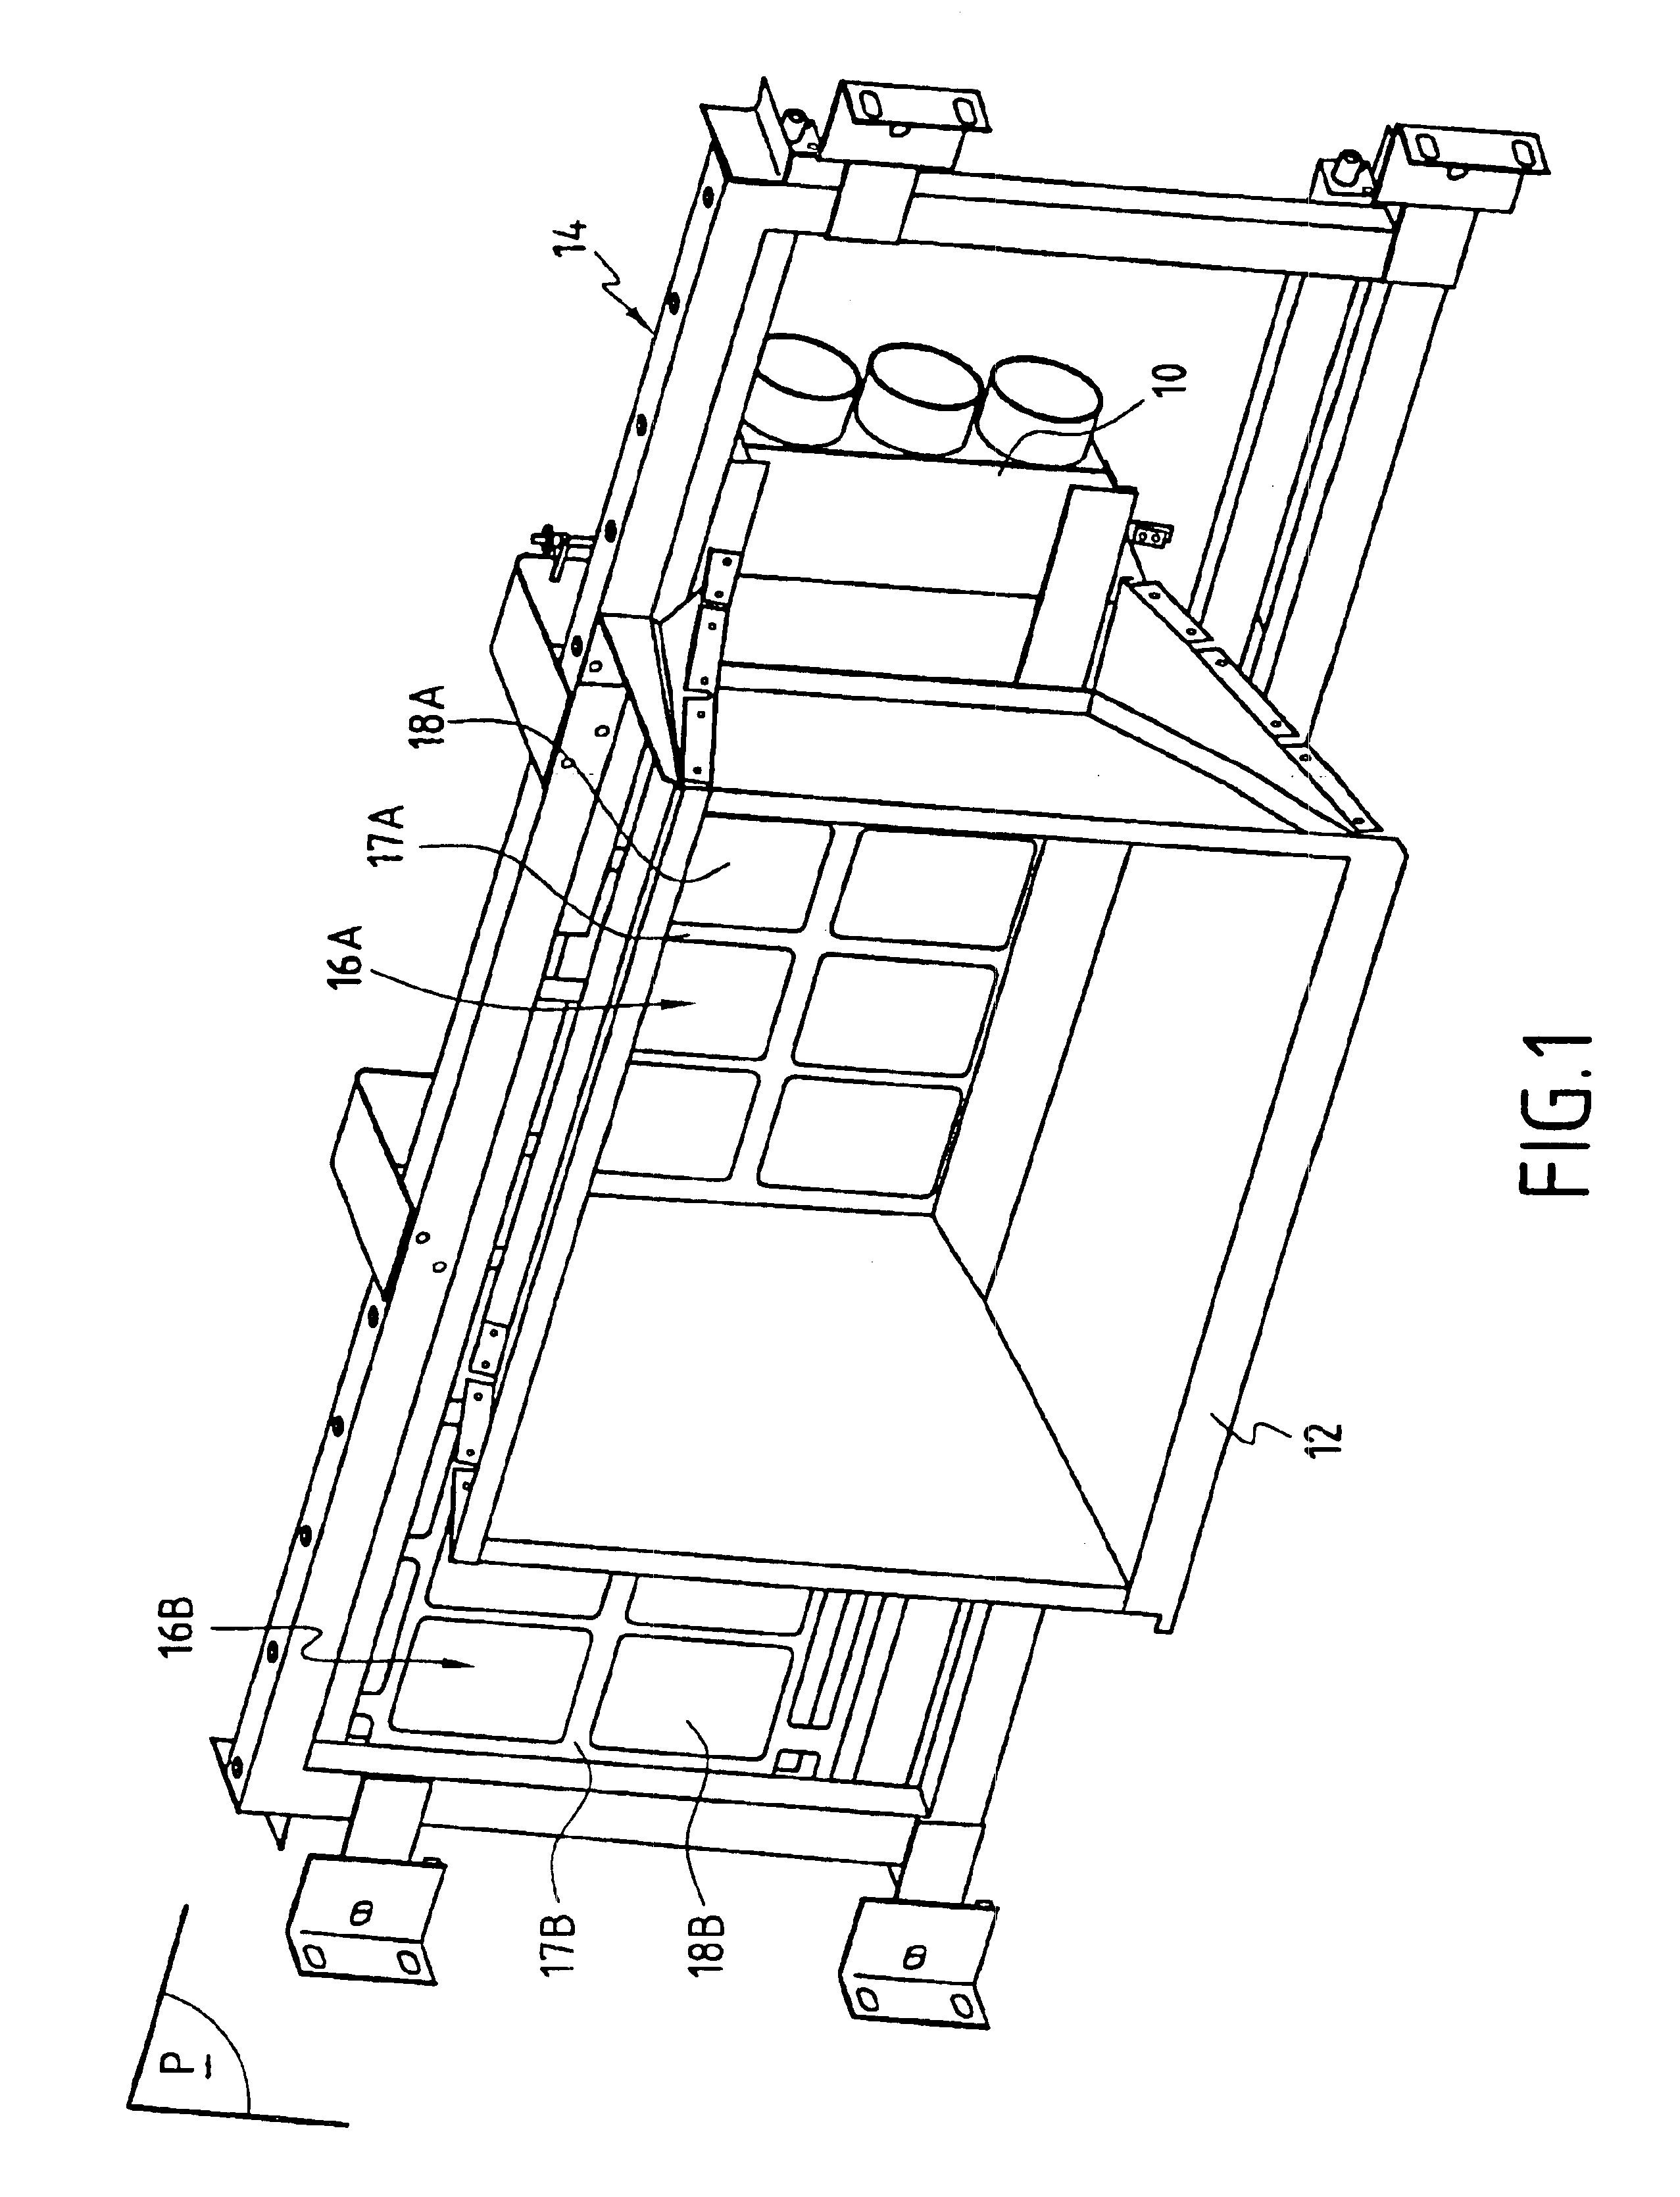 Device for exposing a face of a panel